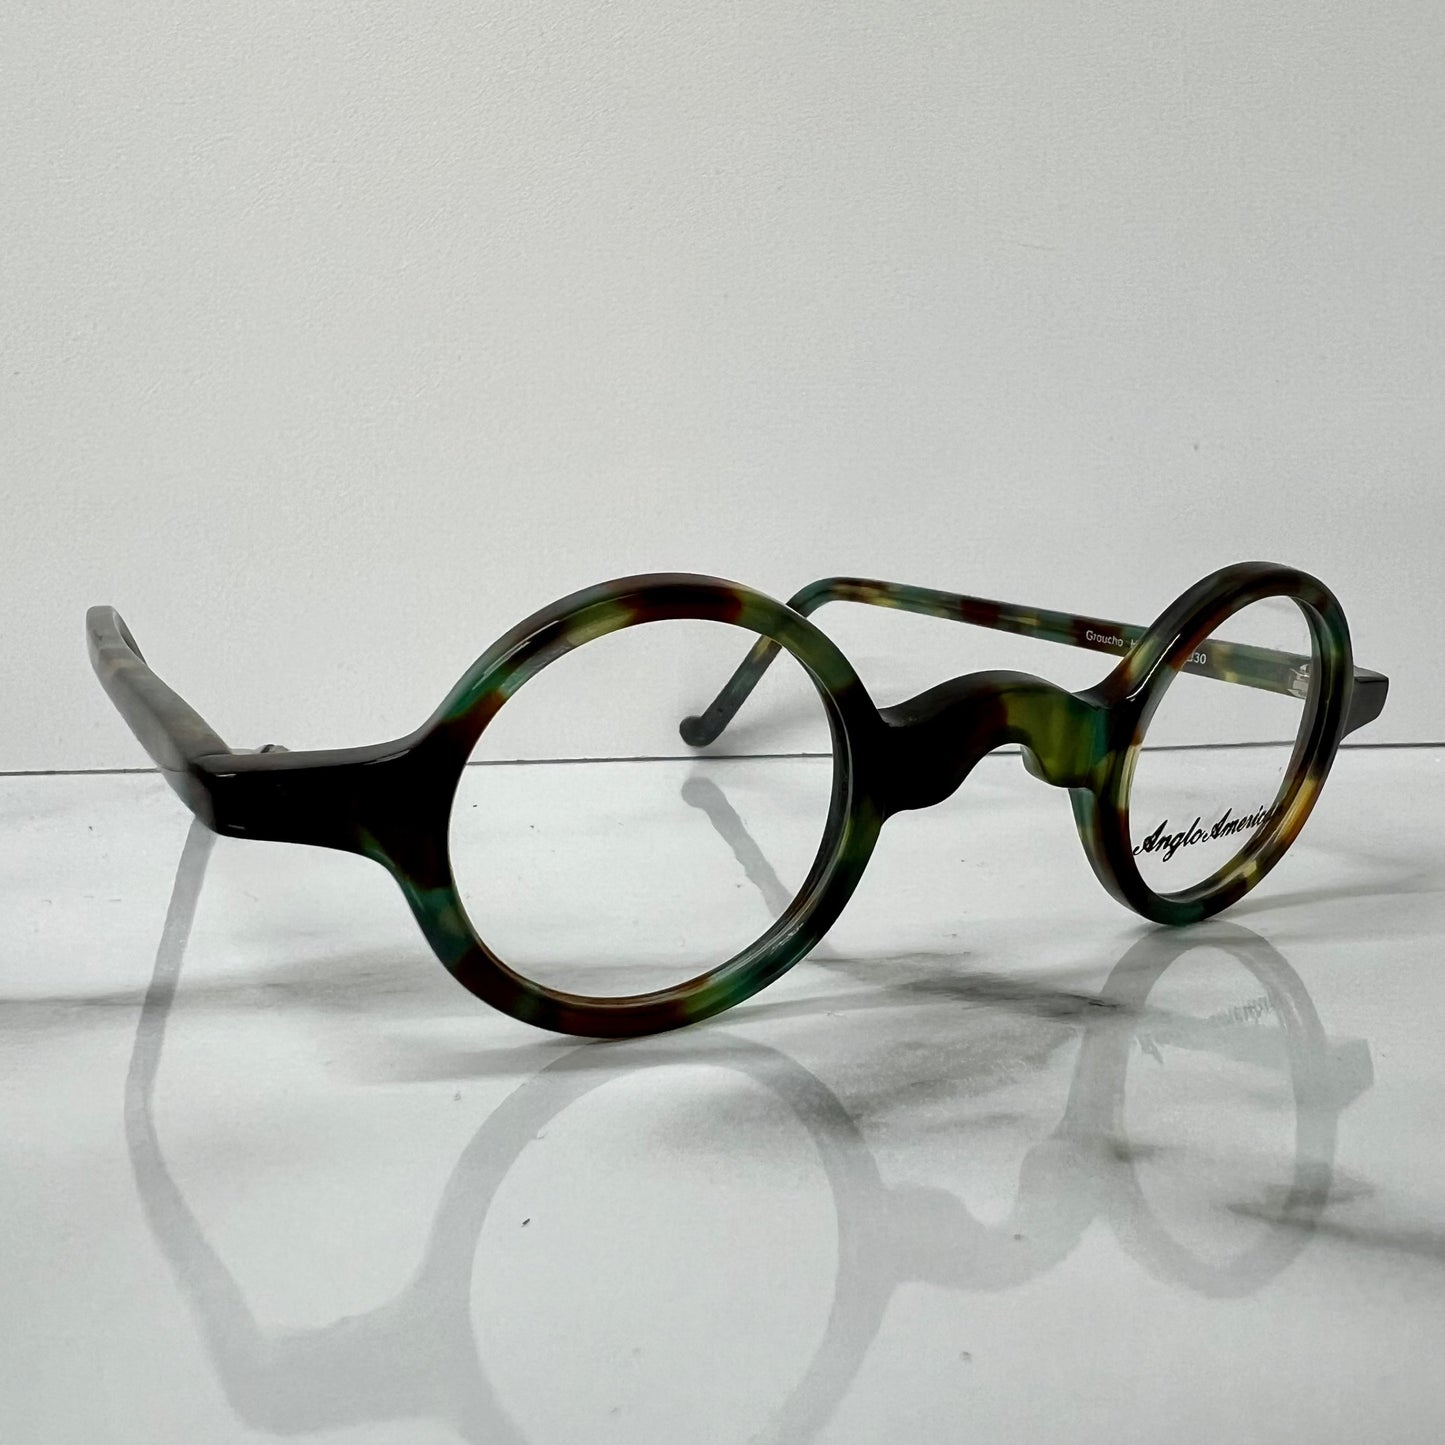 Anglo American Groucho Optical Glasses Green Camouflage 33mm Designer Eyeglasses